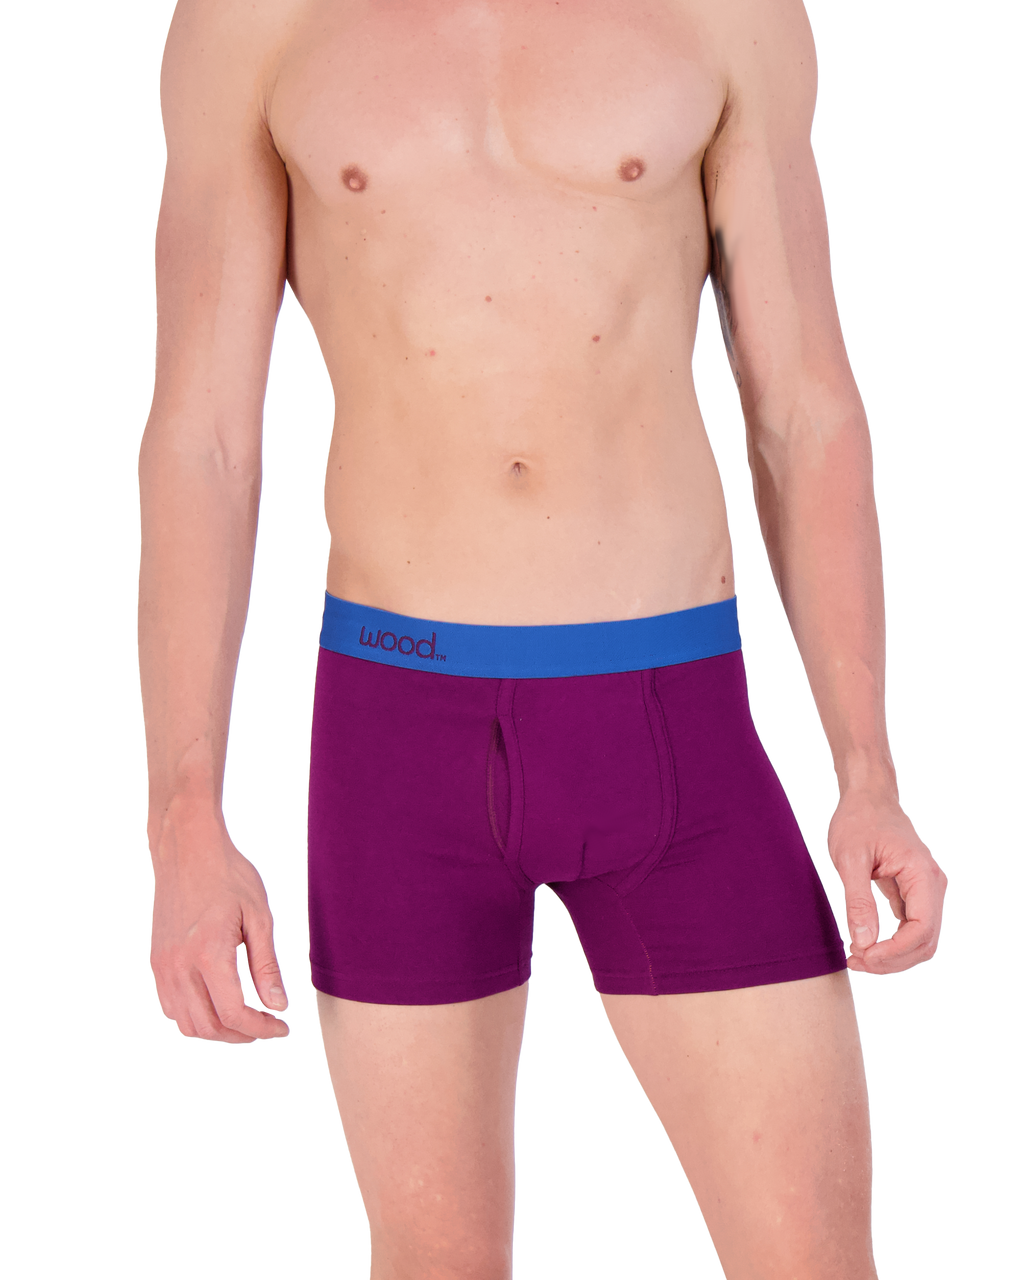 Wood Boxer Brief W/Fly